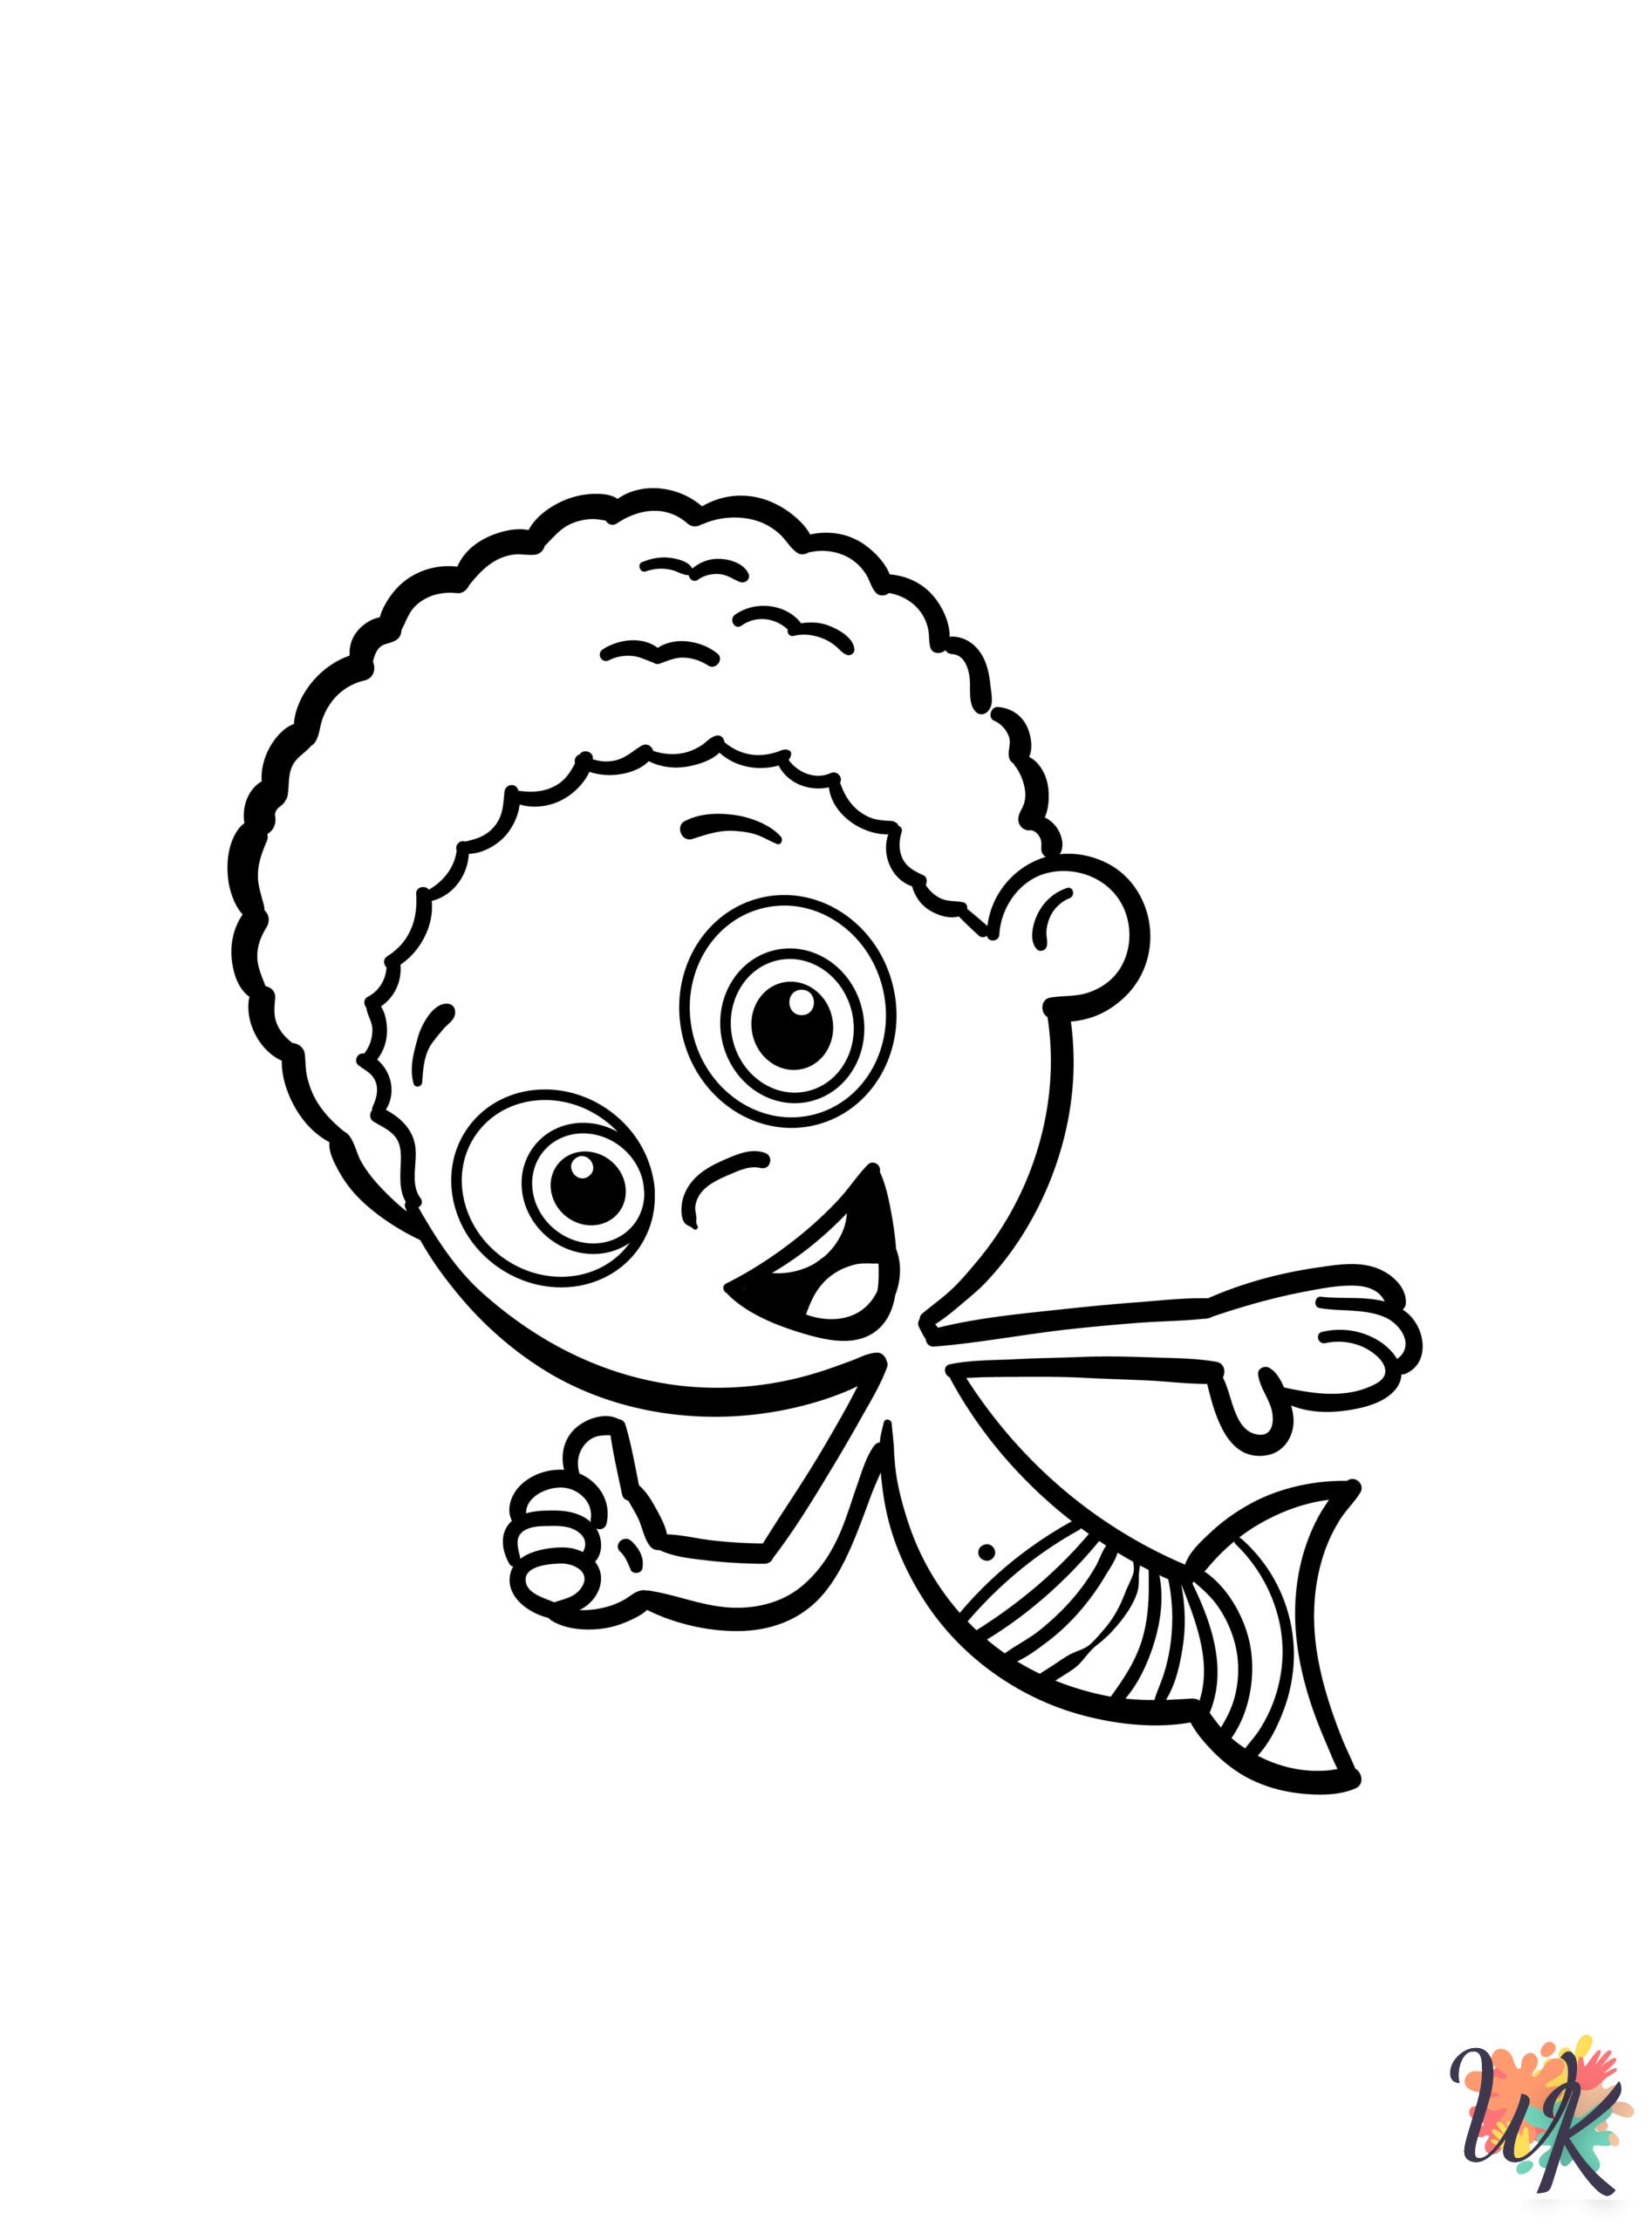 Bubble Guppies coloring book pages